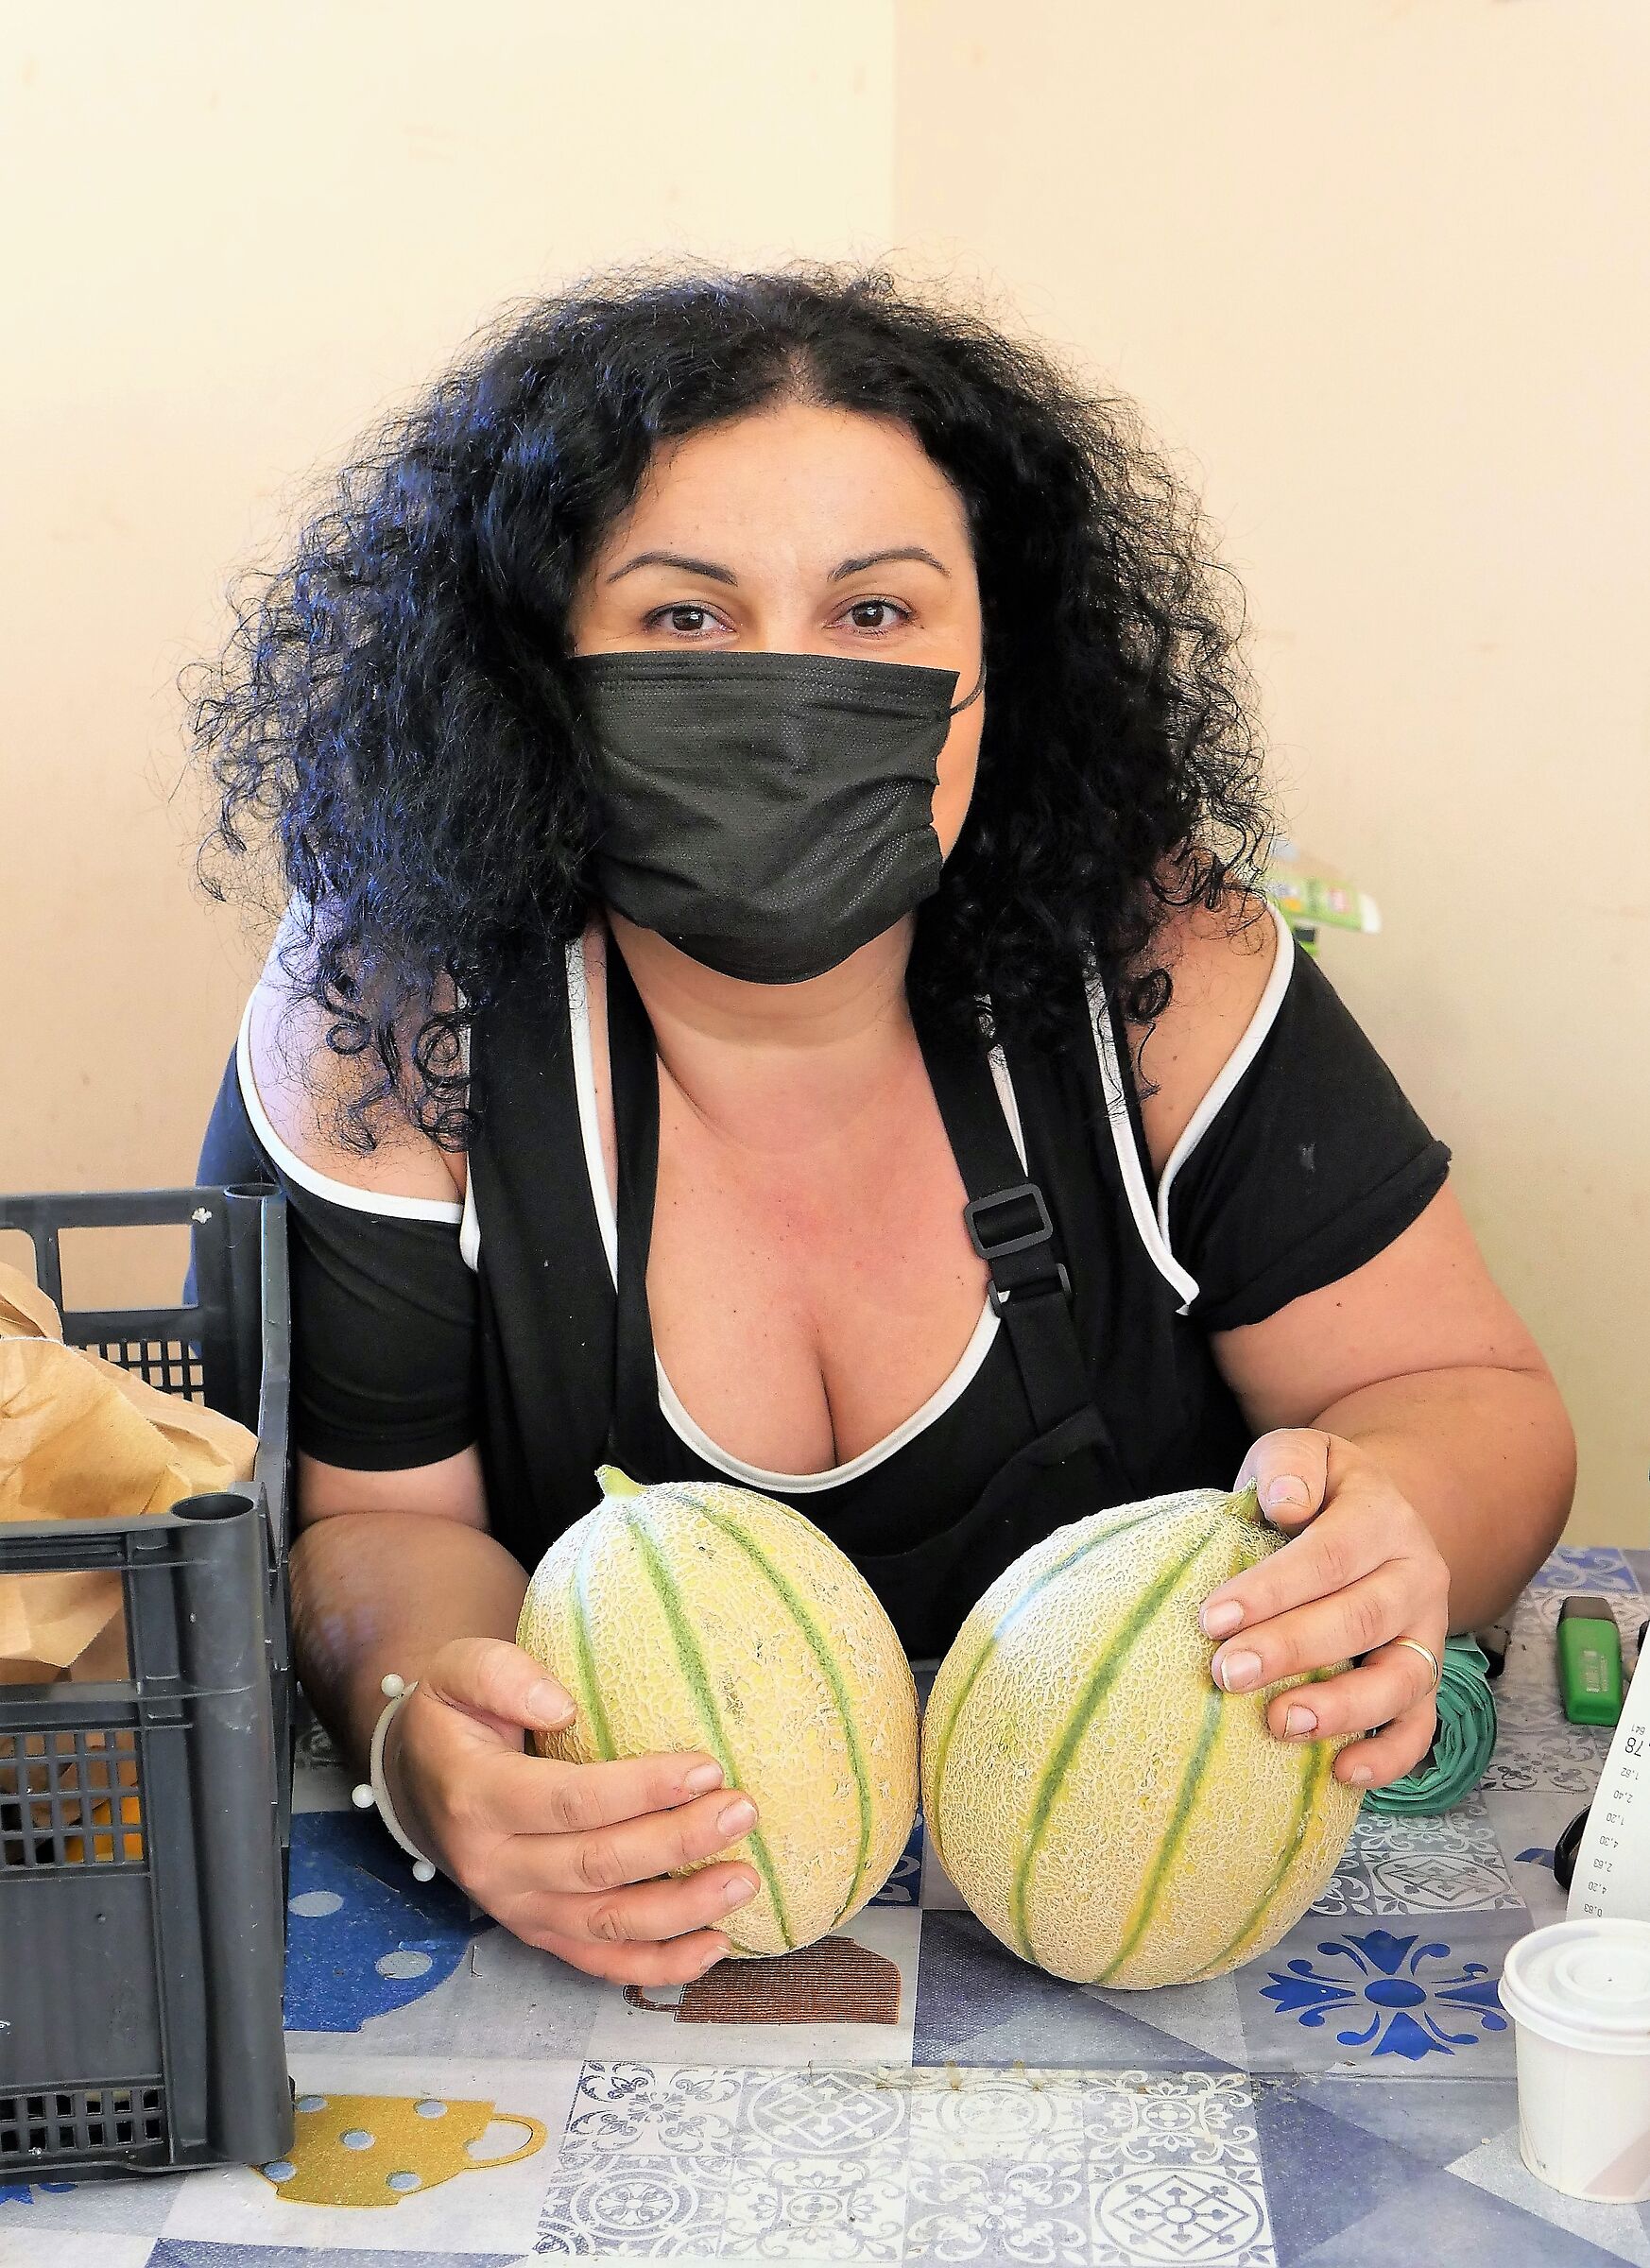 By the way, two melons, please!...